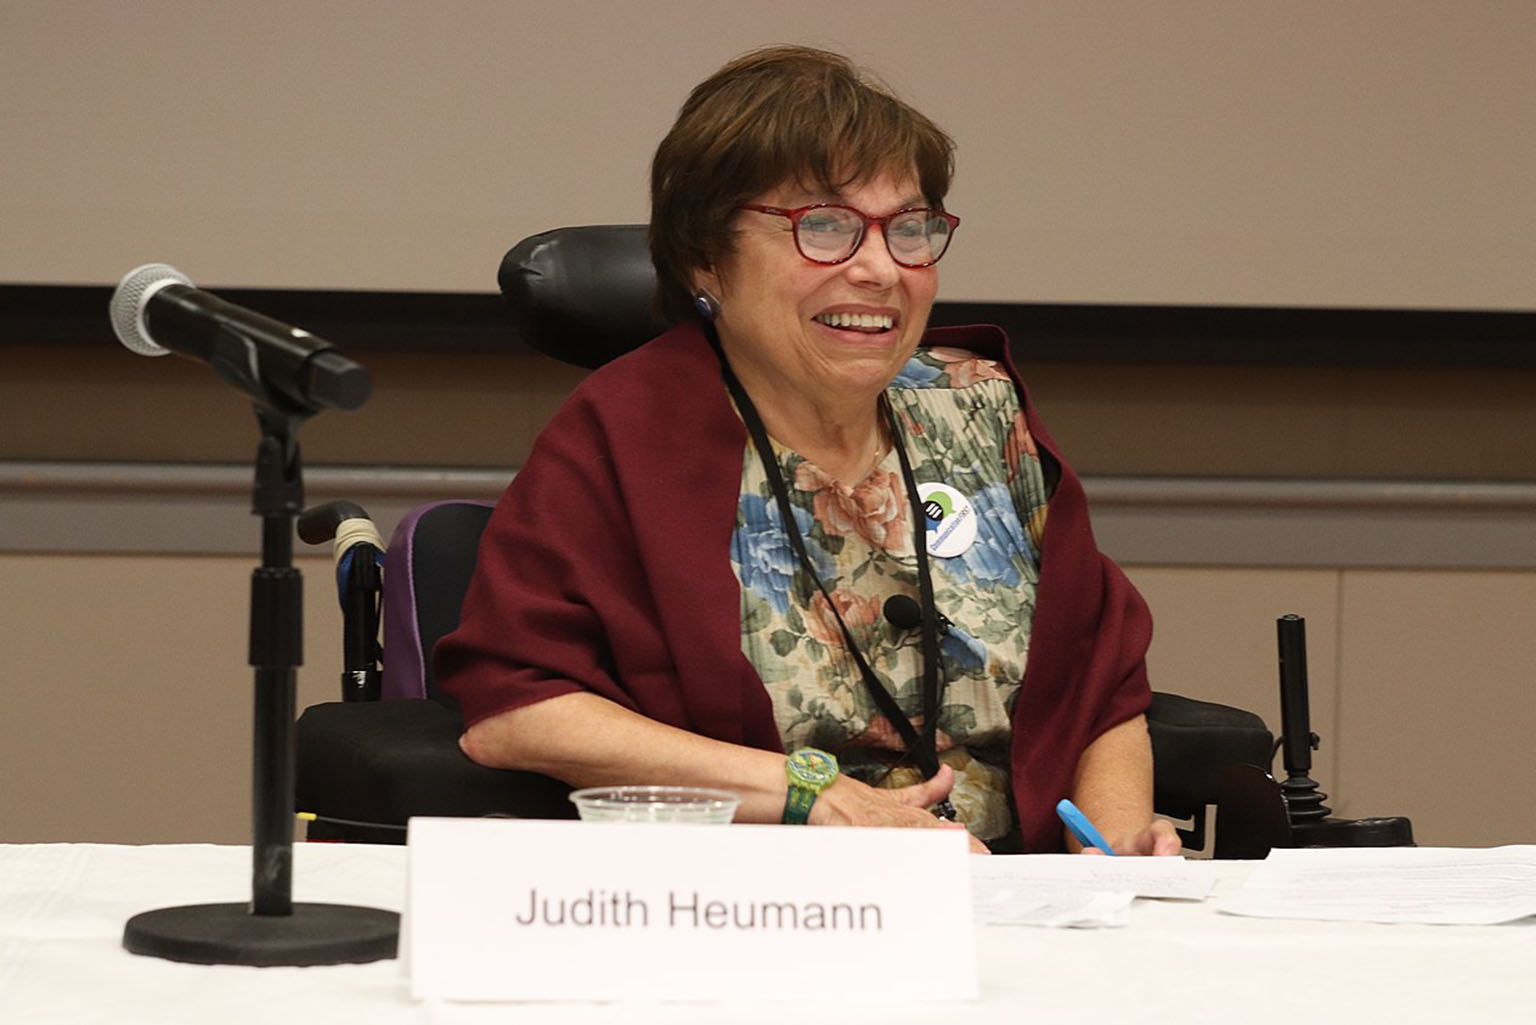 Judy Heumann seating with a microphone.